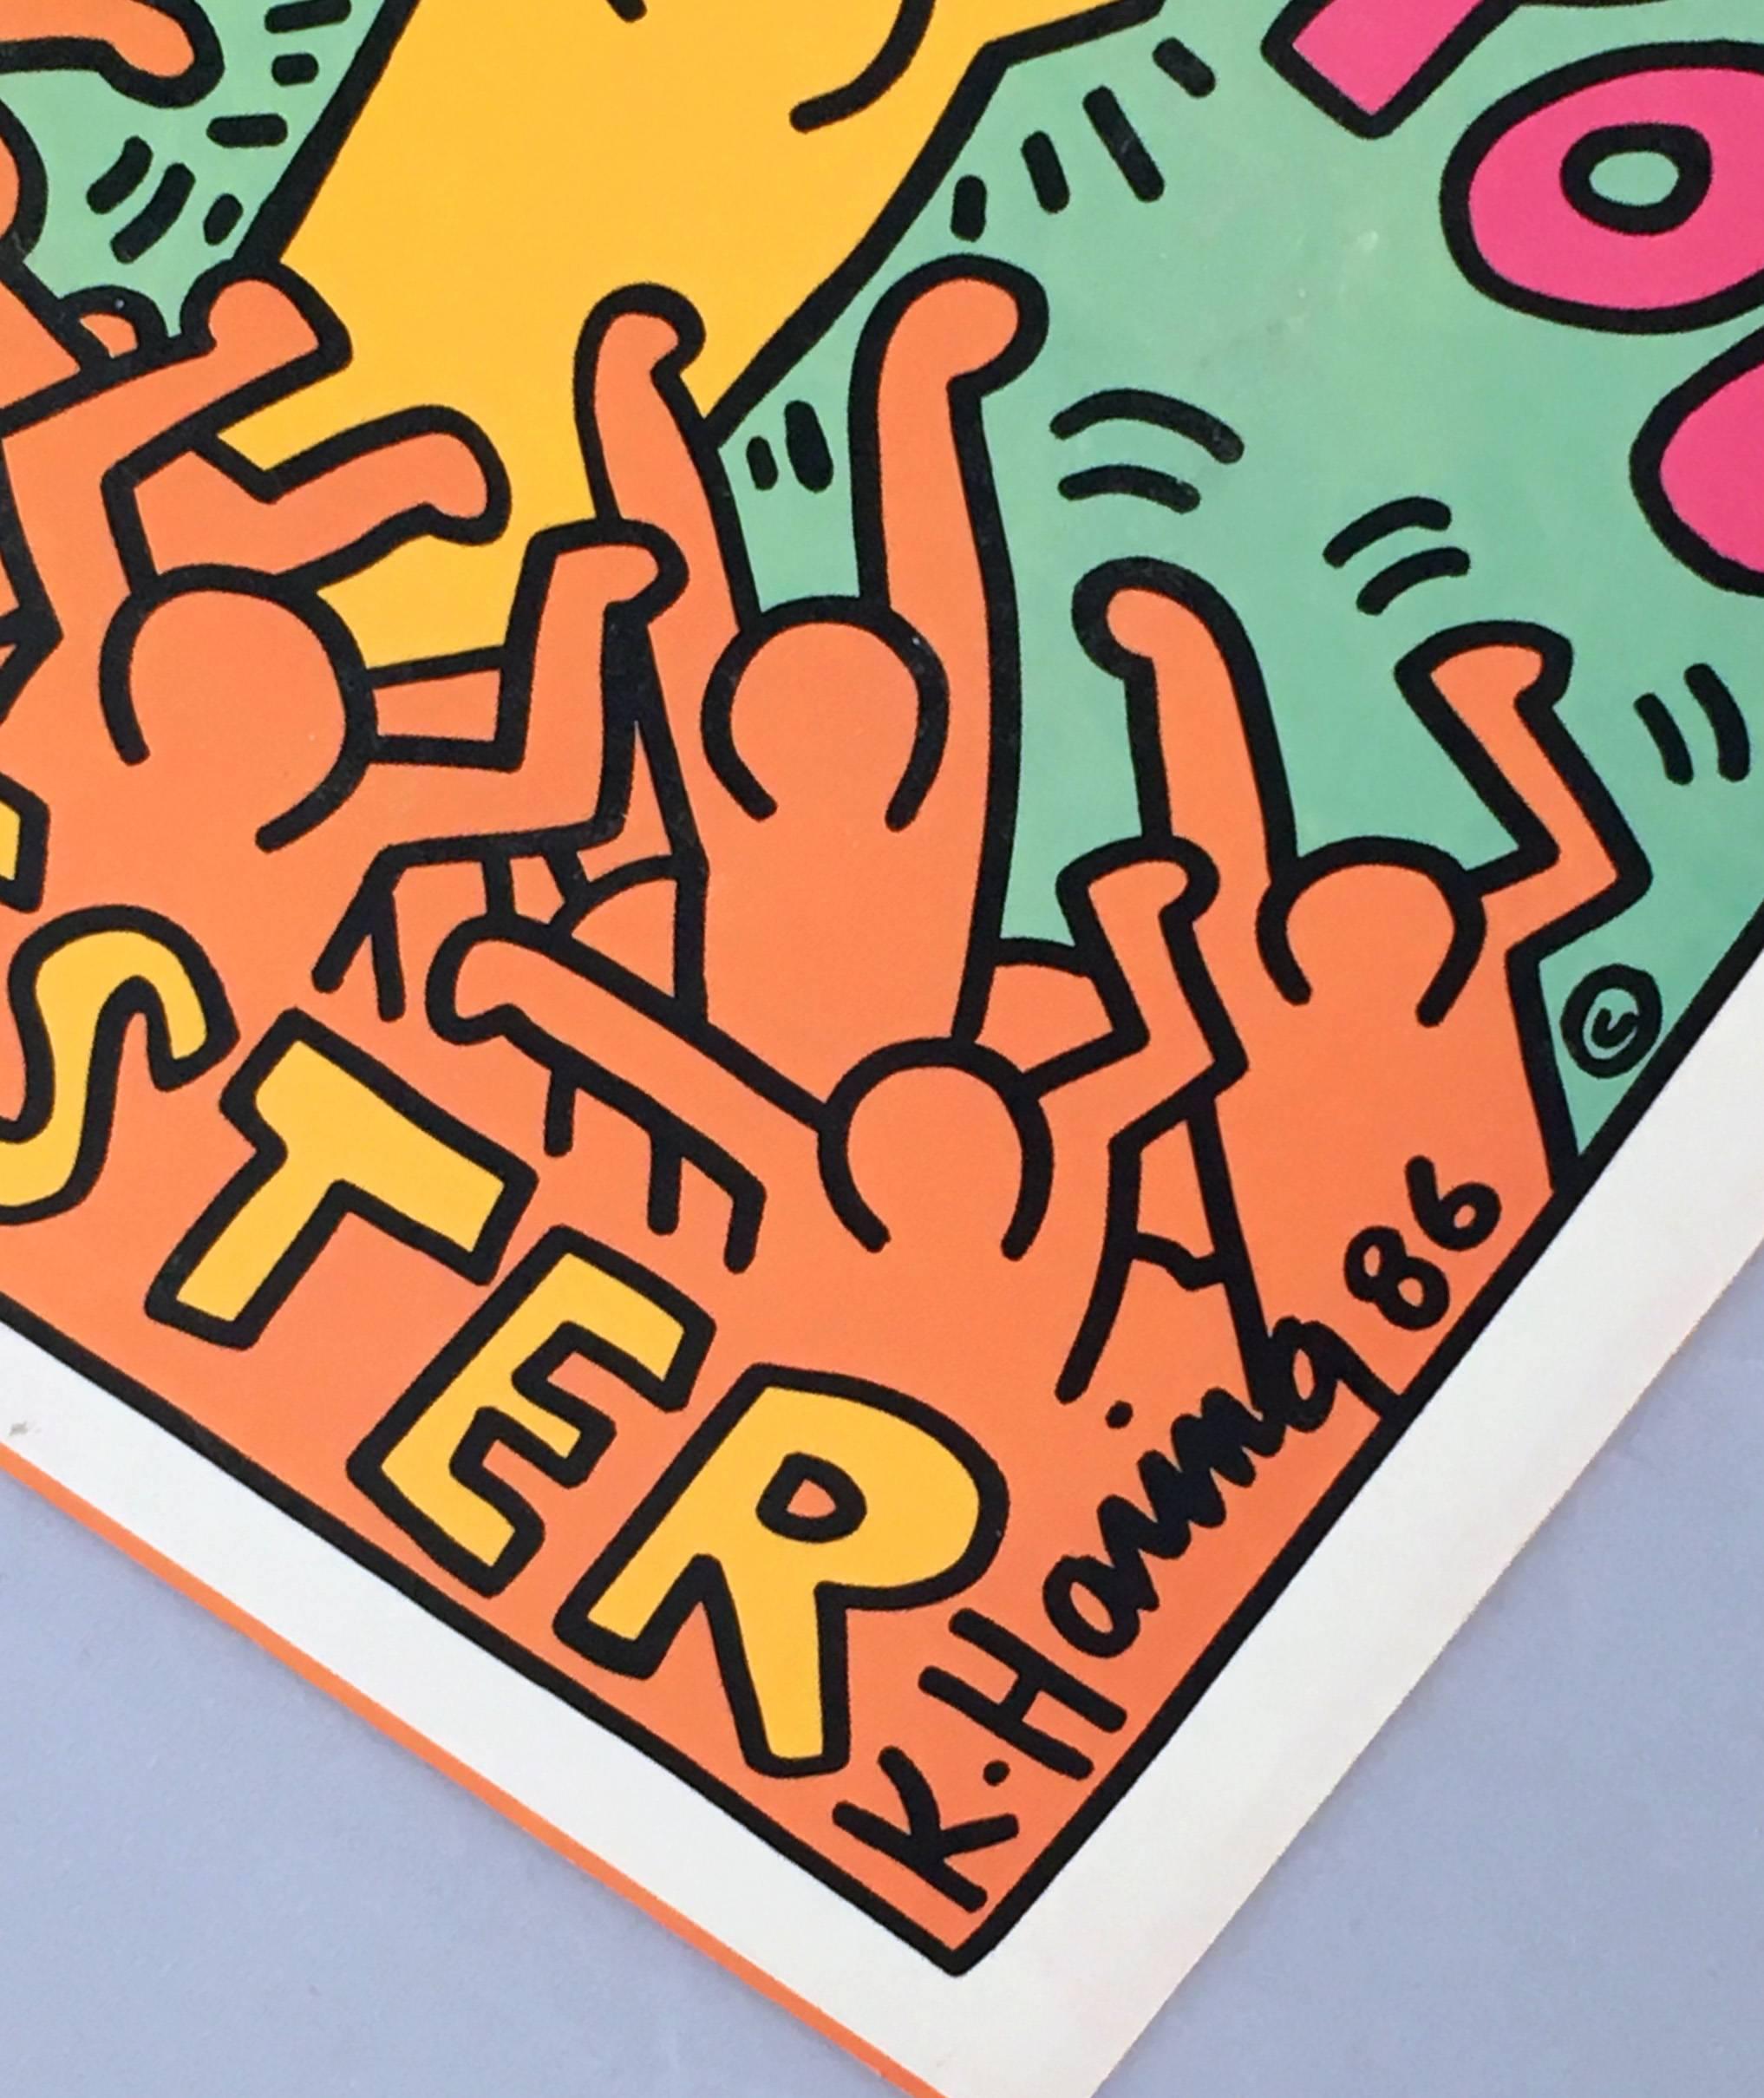 Vintage Vinyl Record Art by Keith Haring with bright, lush colors that make for stand-out wall art within reach

Year: 1986 
Off-Set Lithograph on record jacket, vinyl record 
Dimensions: 7 x 7 inches 
Cover: Bright, bold, crisp colors; very good